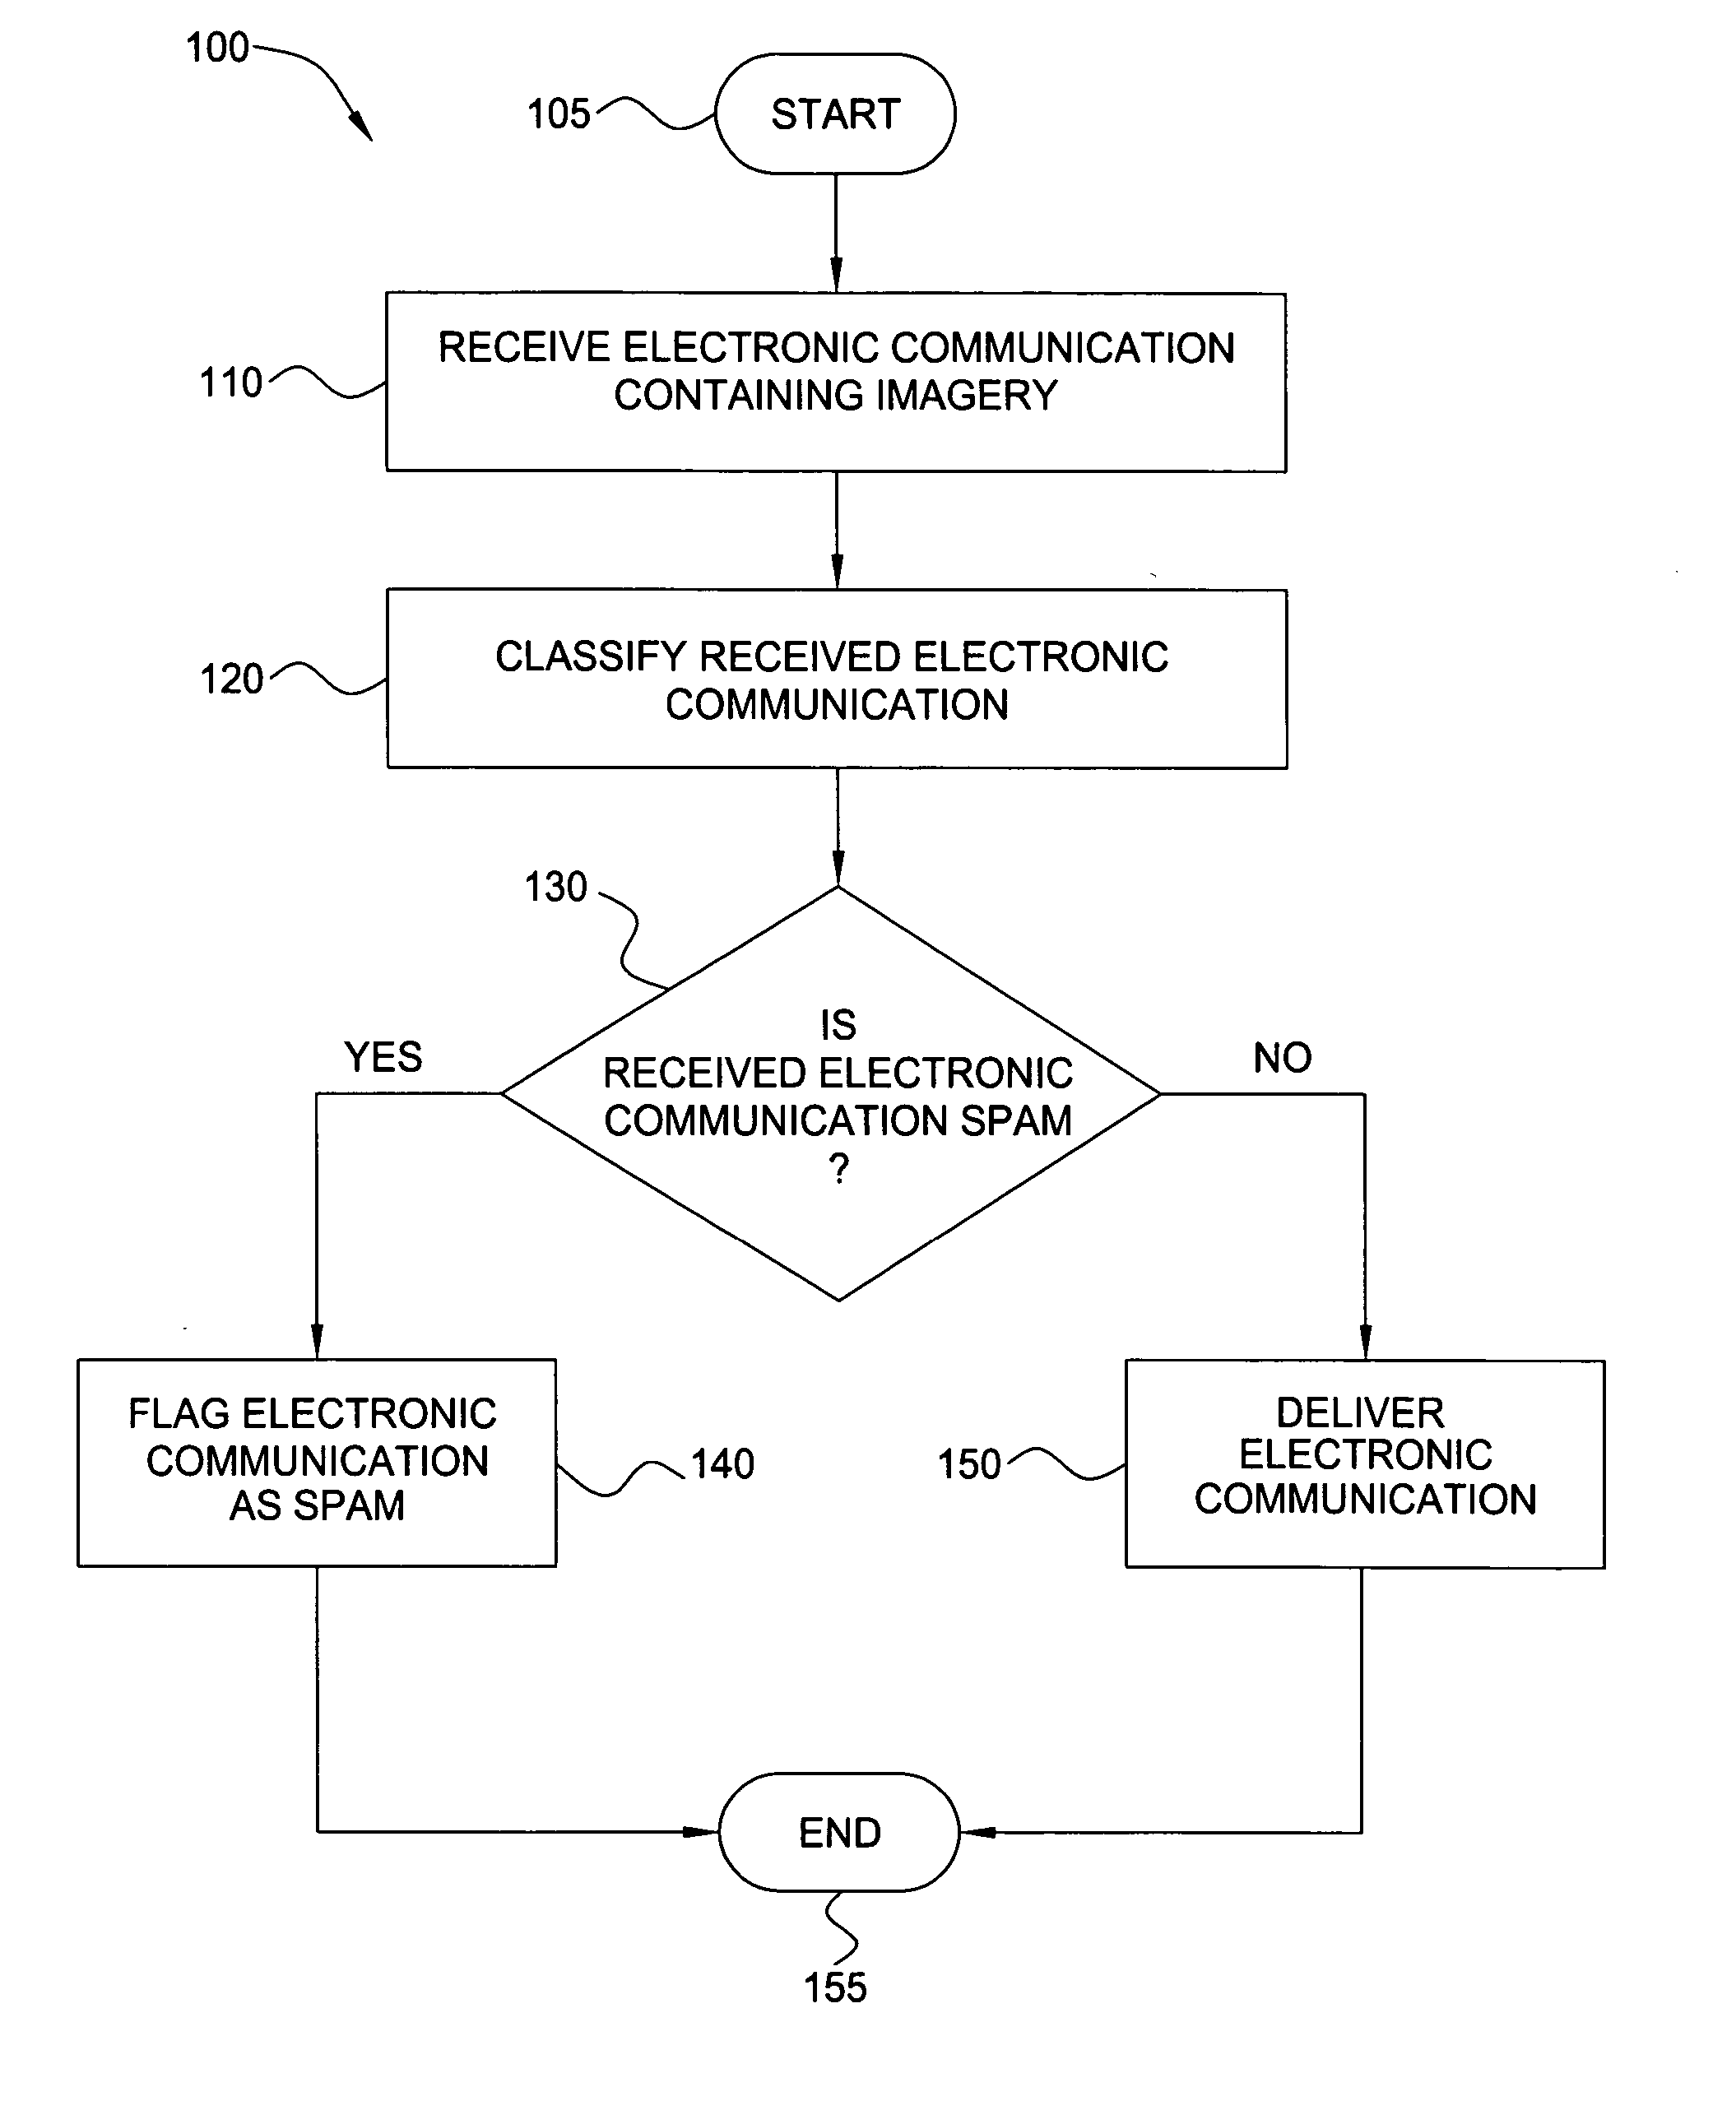 Method and apparatus for analysis of electronic communications containing imagery